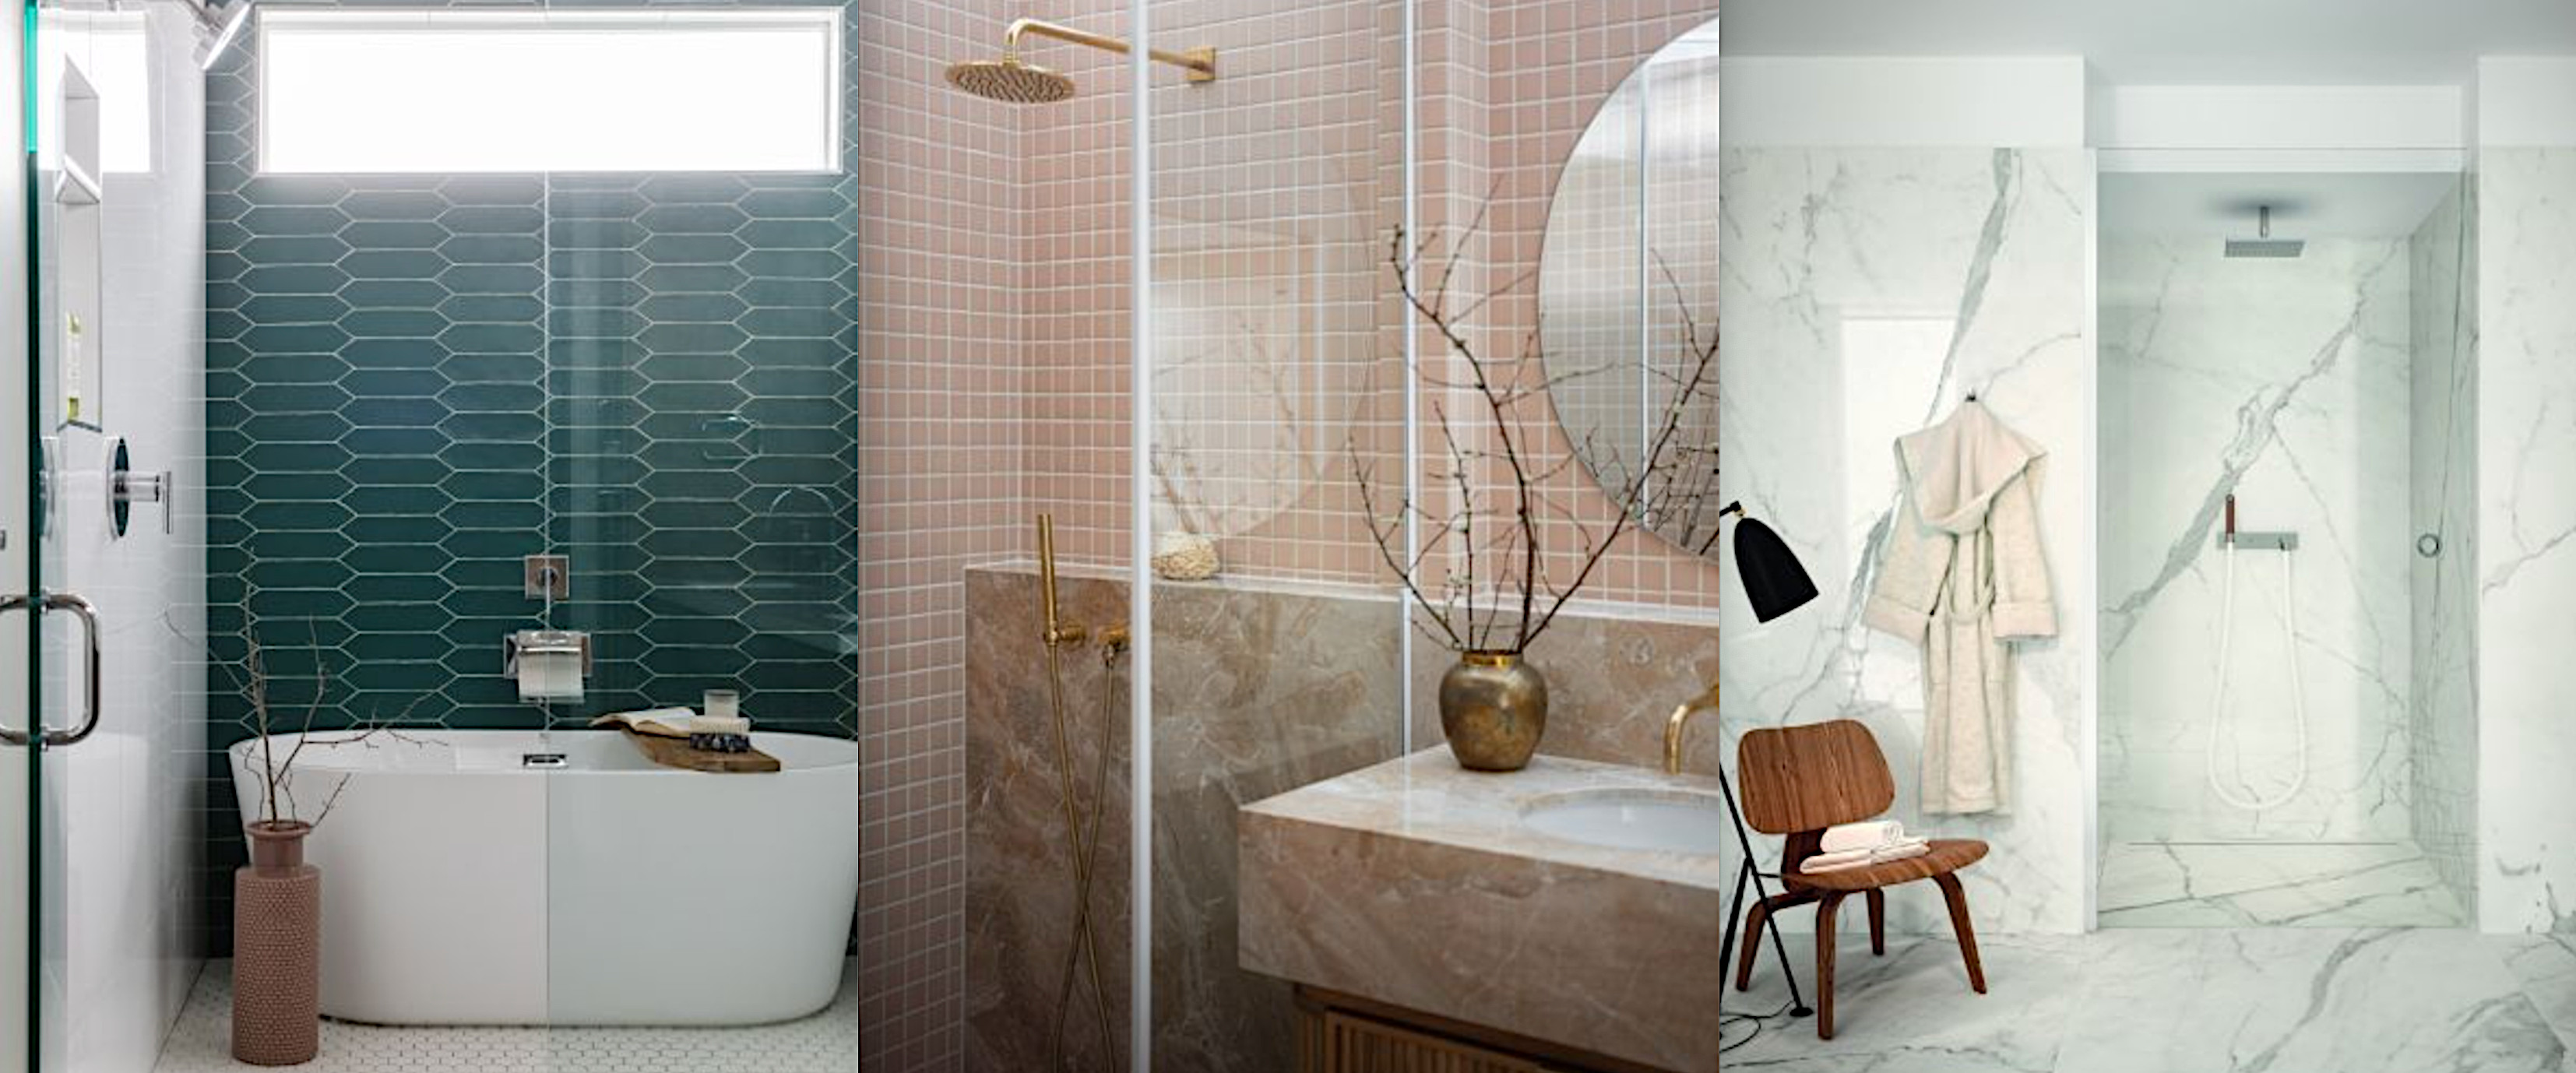 Shower floor ideas – 10 looks layouts and colors for a shower room